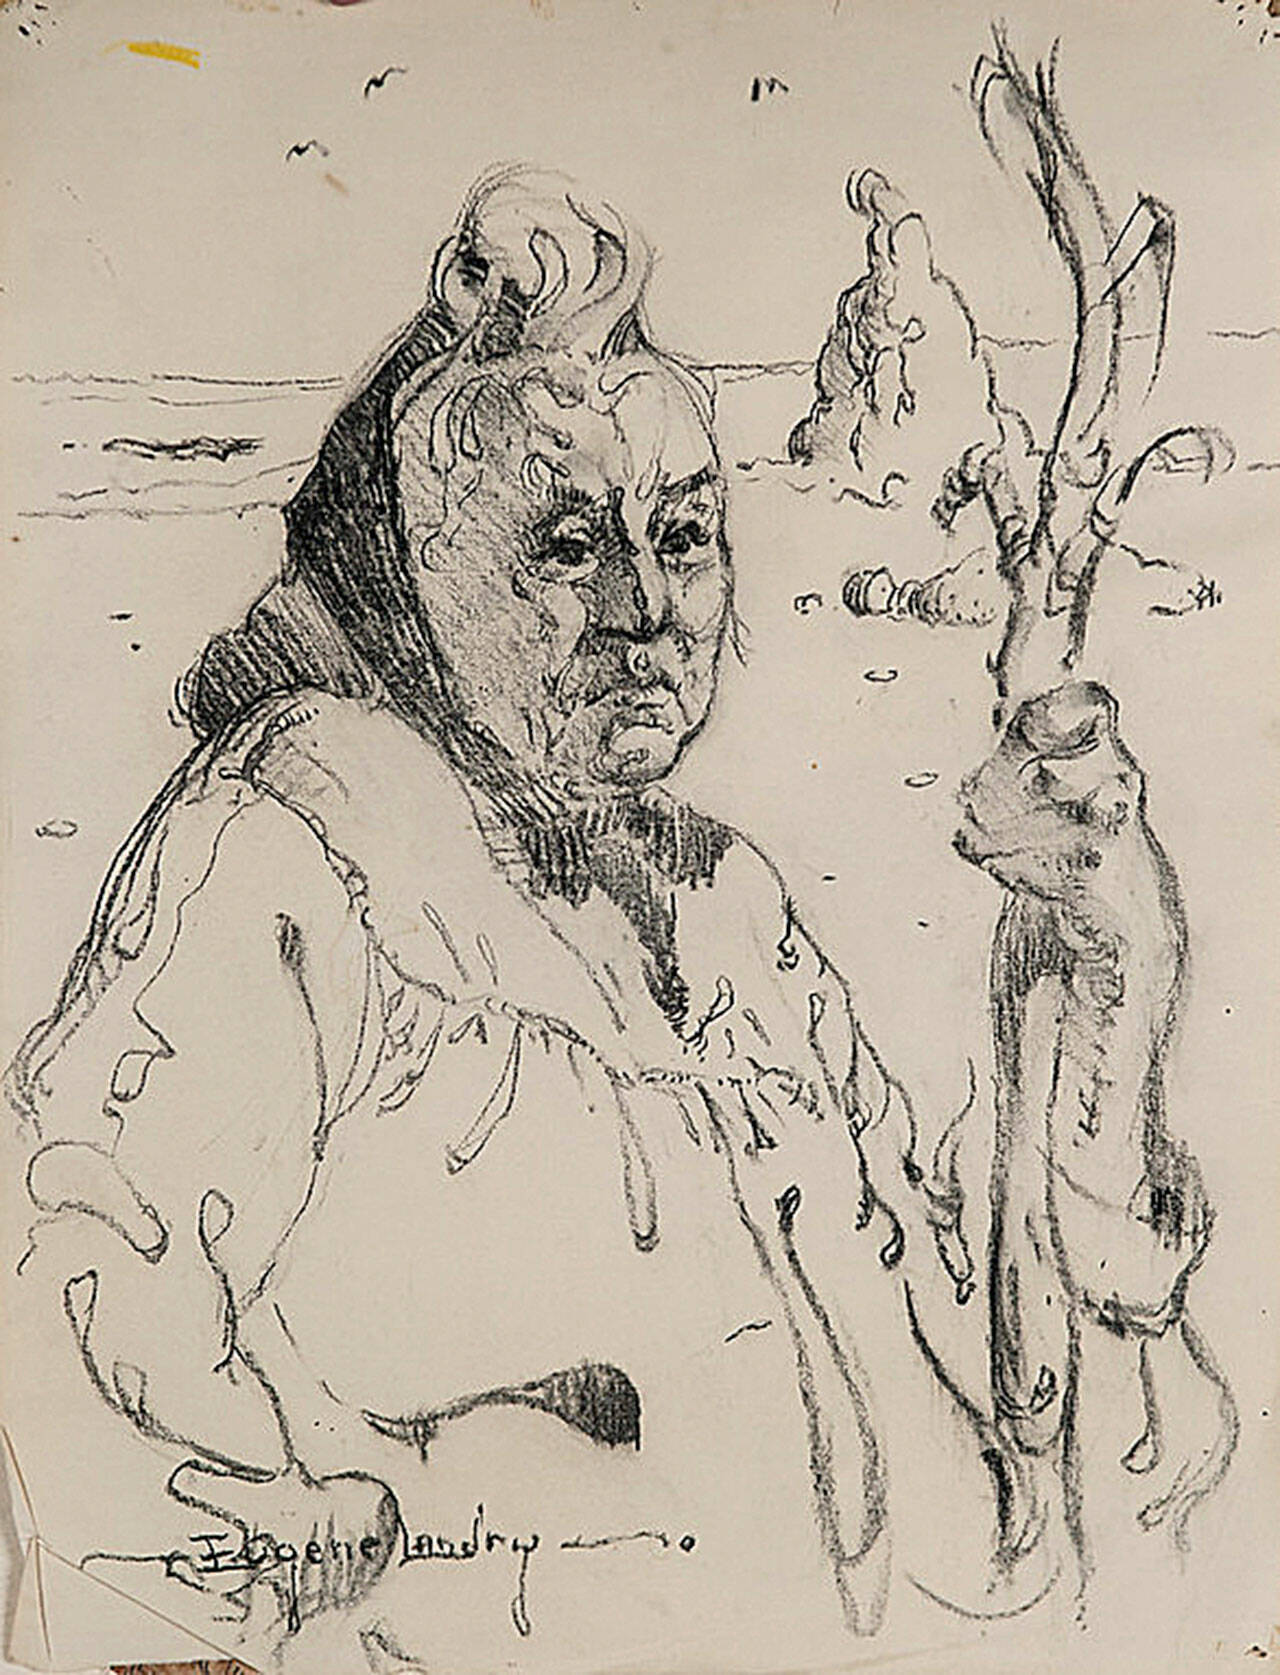 Eugene Landry charcoal portrait of Nina Charley Bumgarner, based on a photo by Josef Scaylea. Bumgarner was the daughter of Shoalwater Bay Chief George Allen Charley. (Courtesy Judith Altruda)